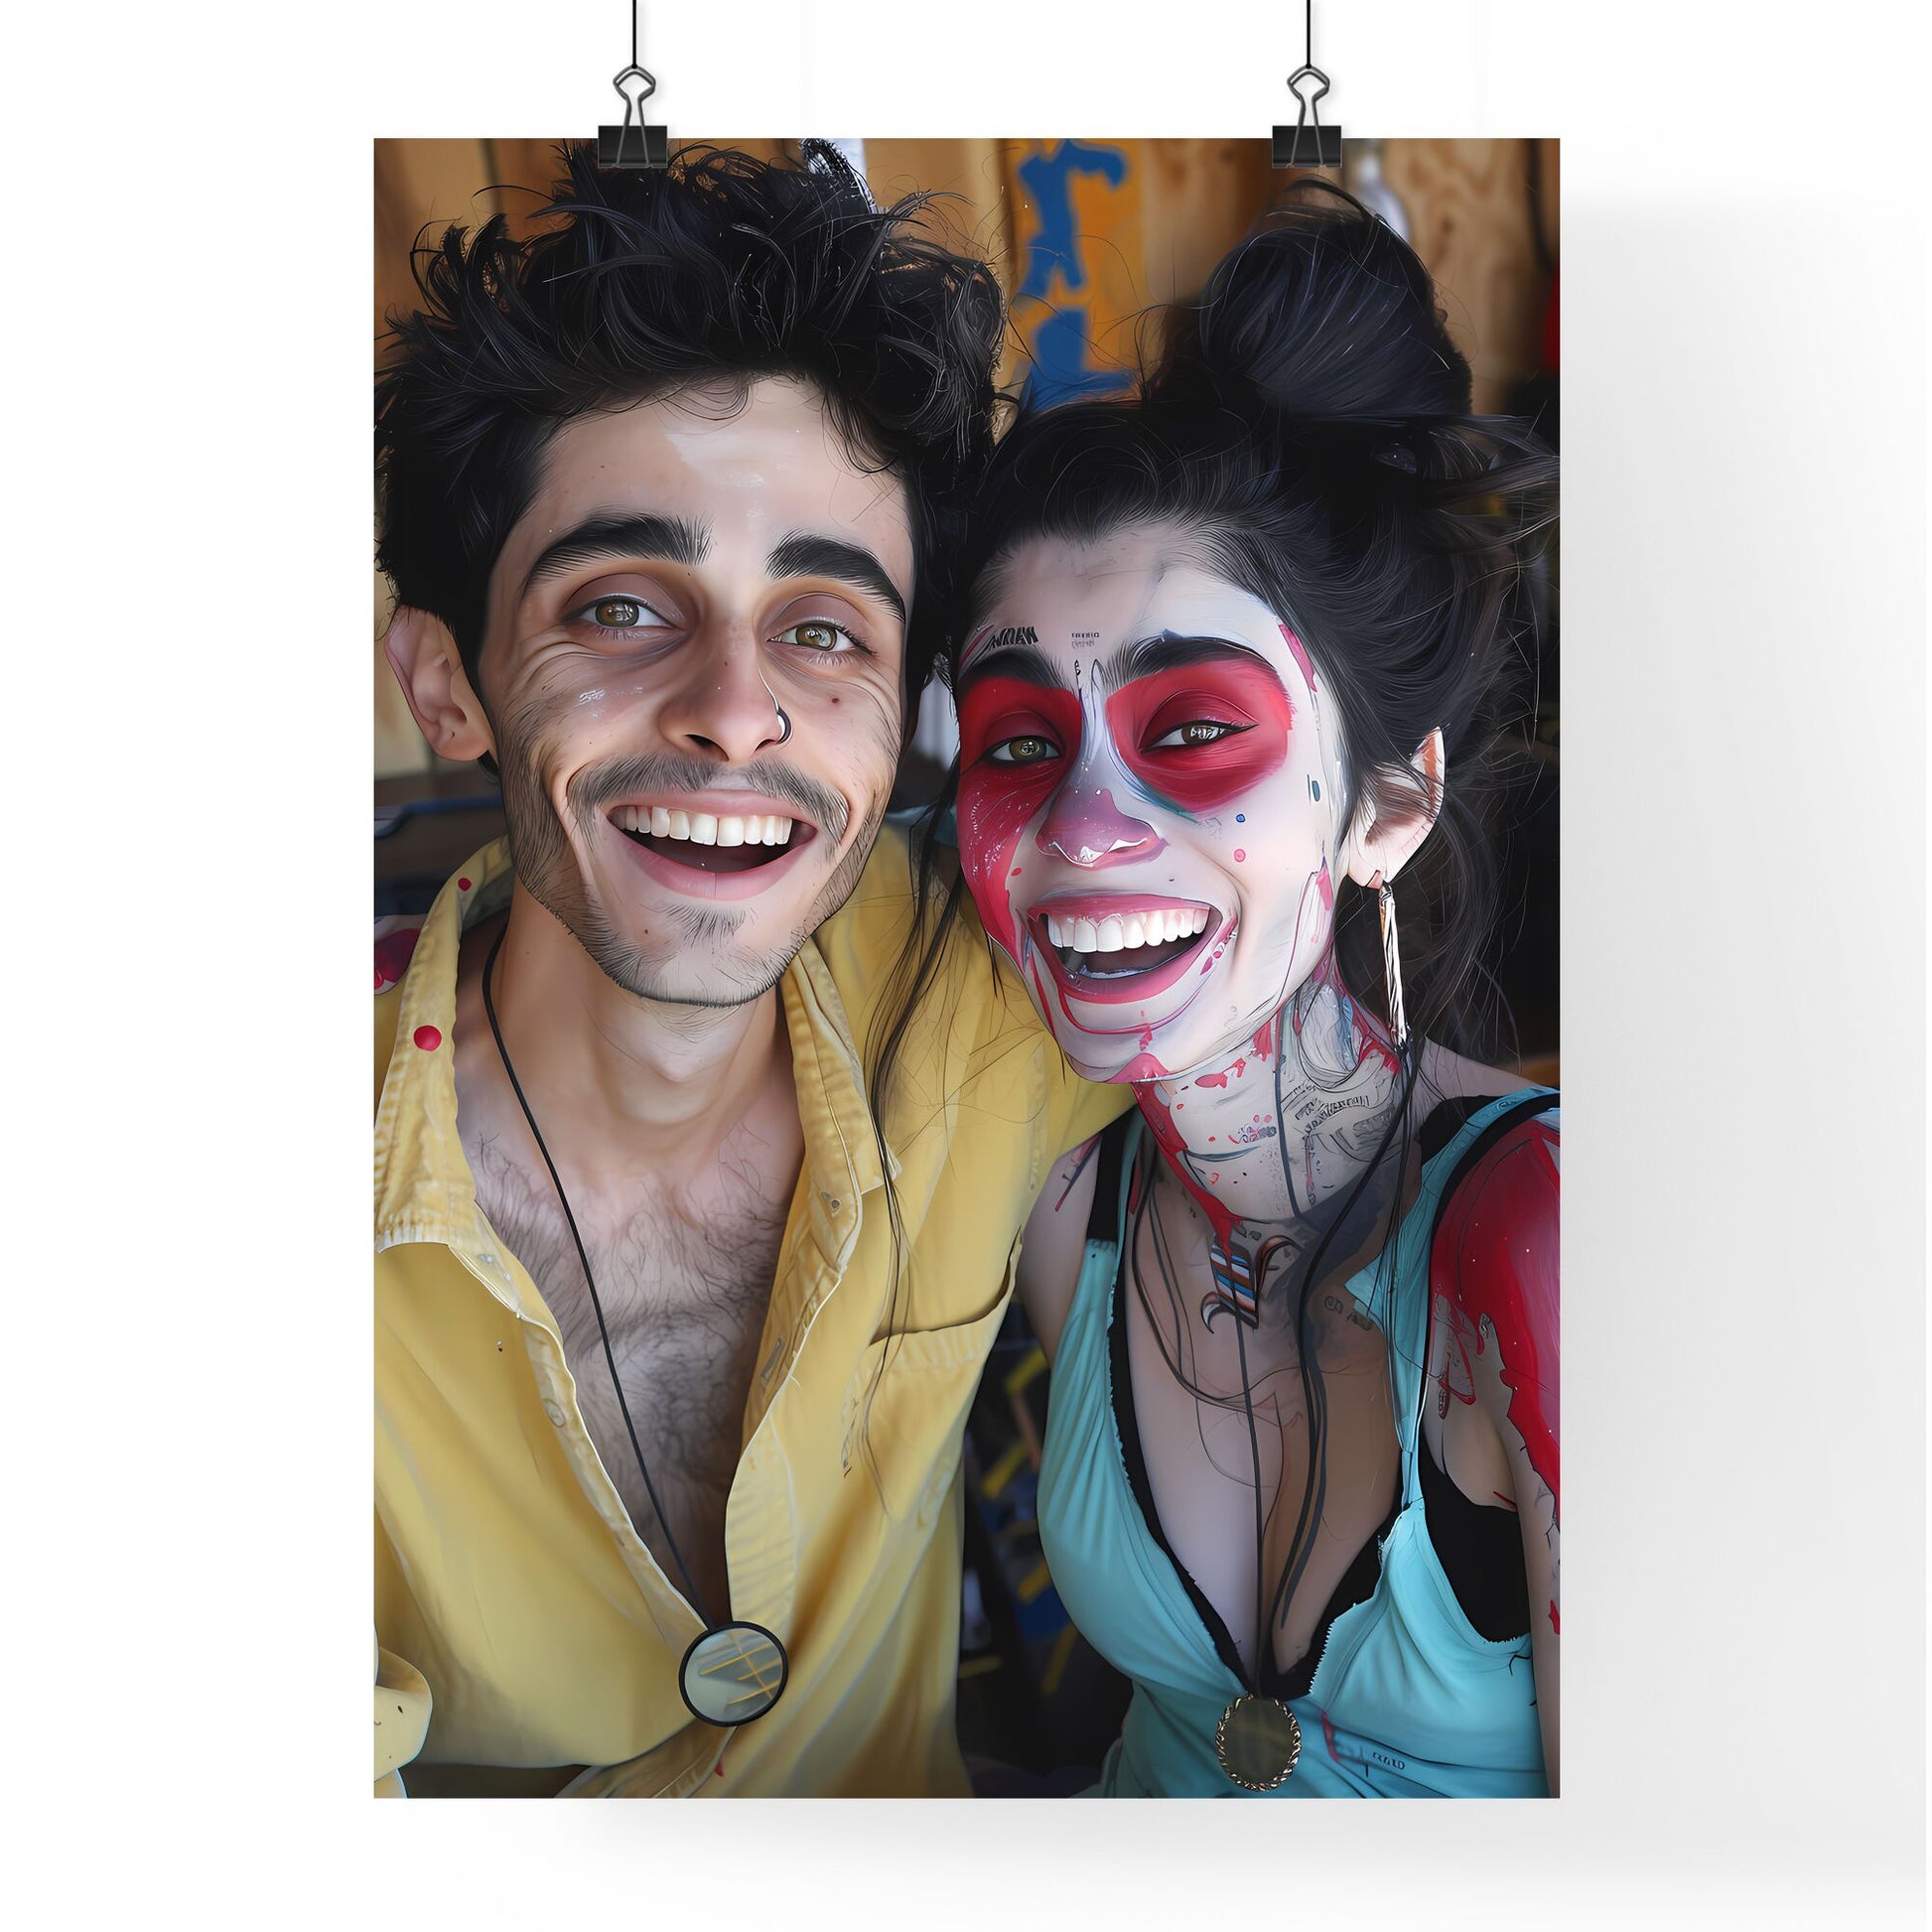 You are creating trigger phrases together to make it easier to access the fun personalities ;) #SchizoLove - a man and woman with painted face Default Title